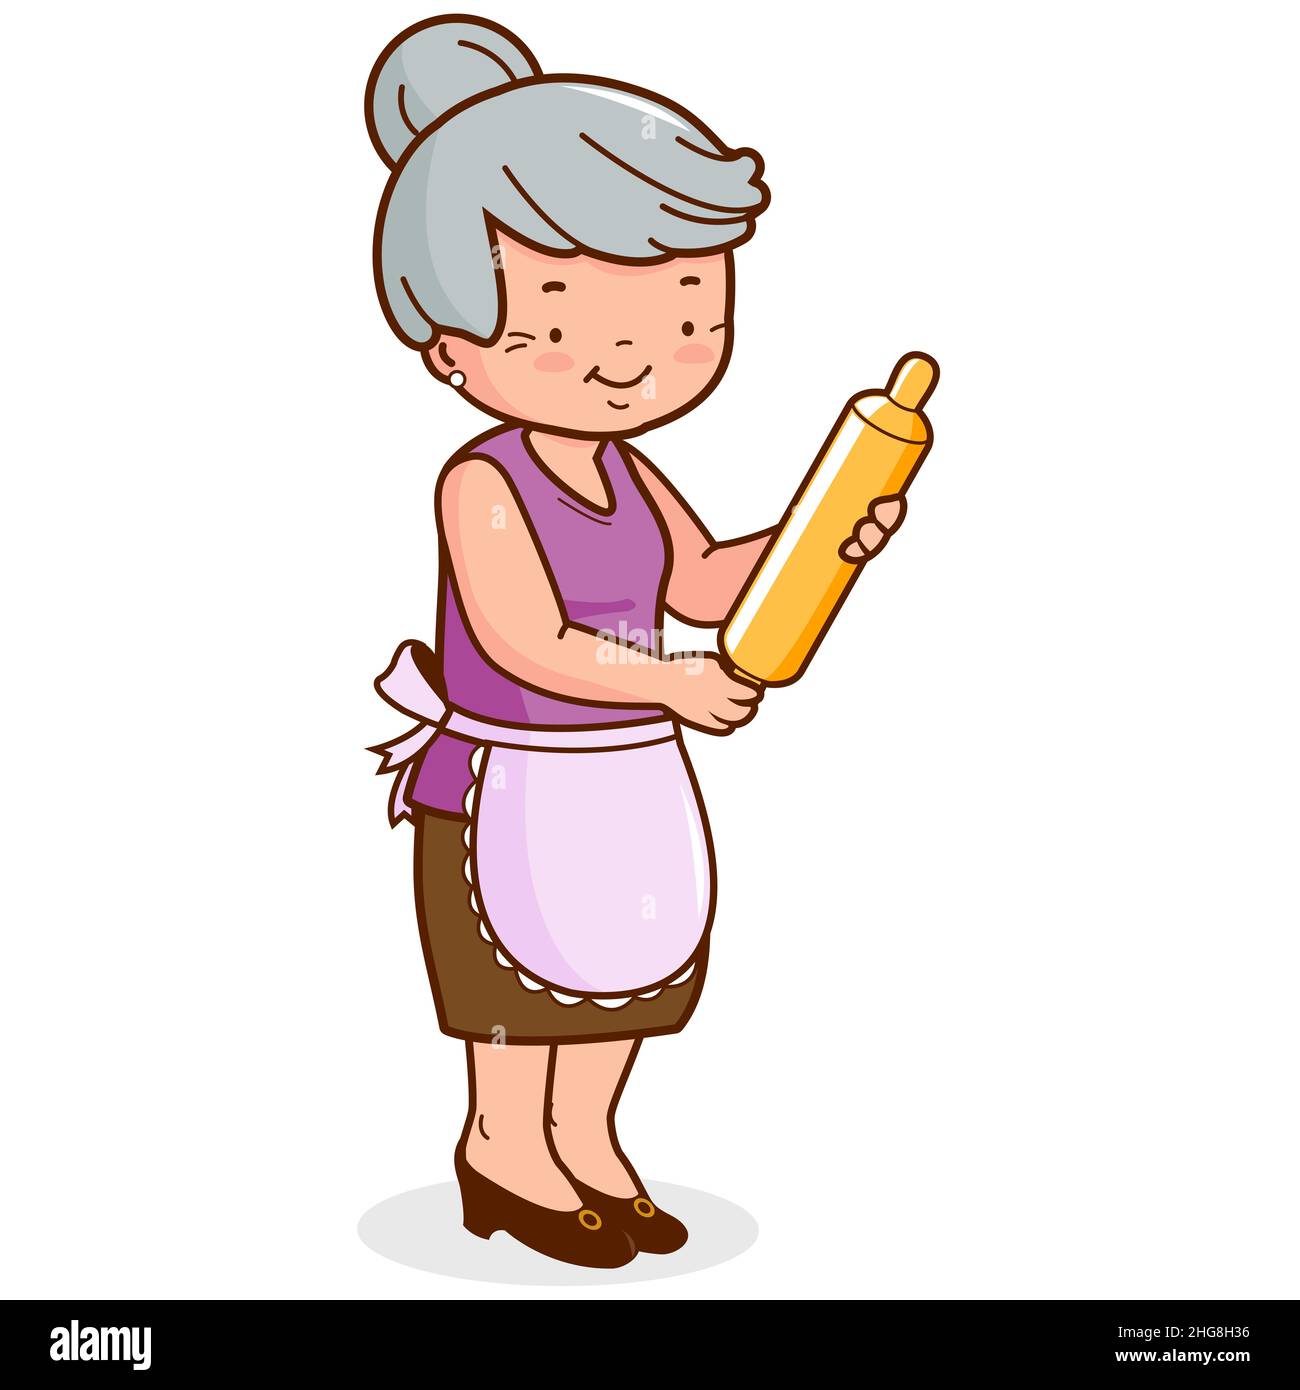 Grandma holding a rolling pin and cooking Stock Photo - Alamy